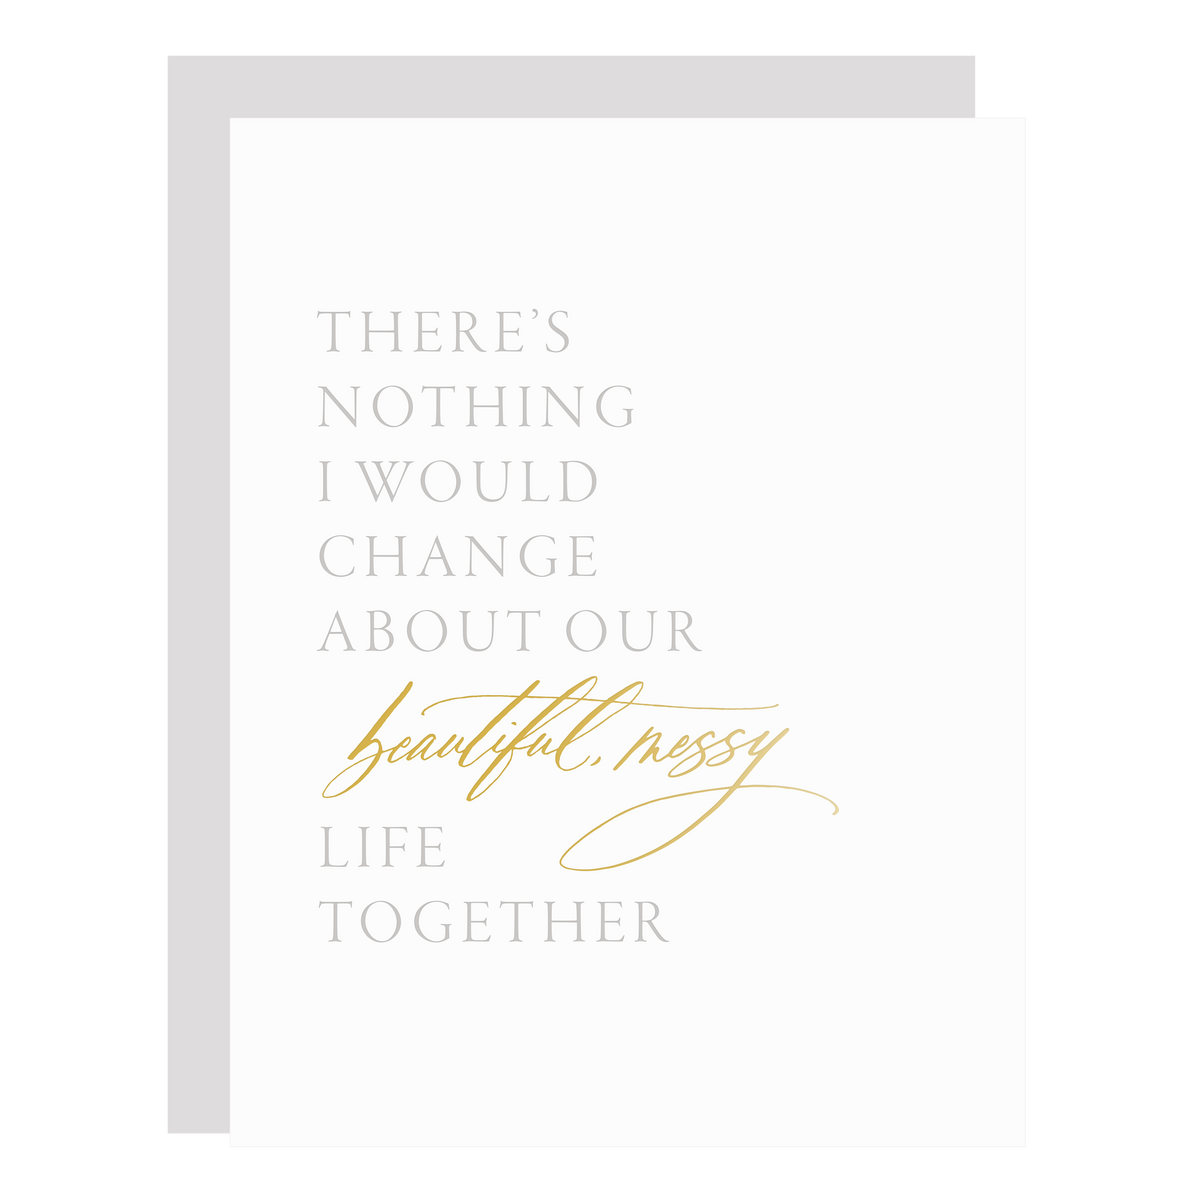 Beautiful Messy Life card, letterpress printed by hand in pale grey ink and gold foil.